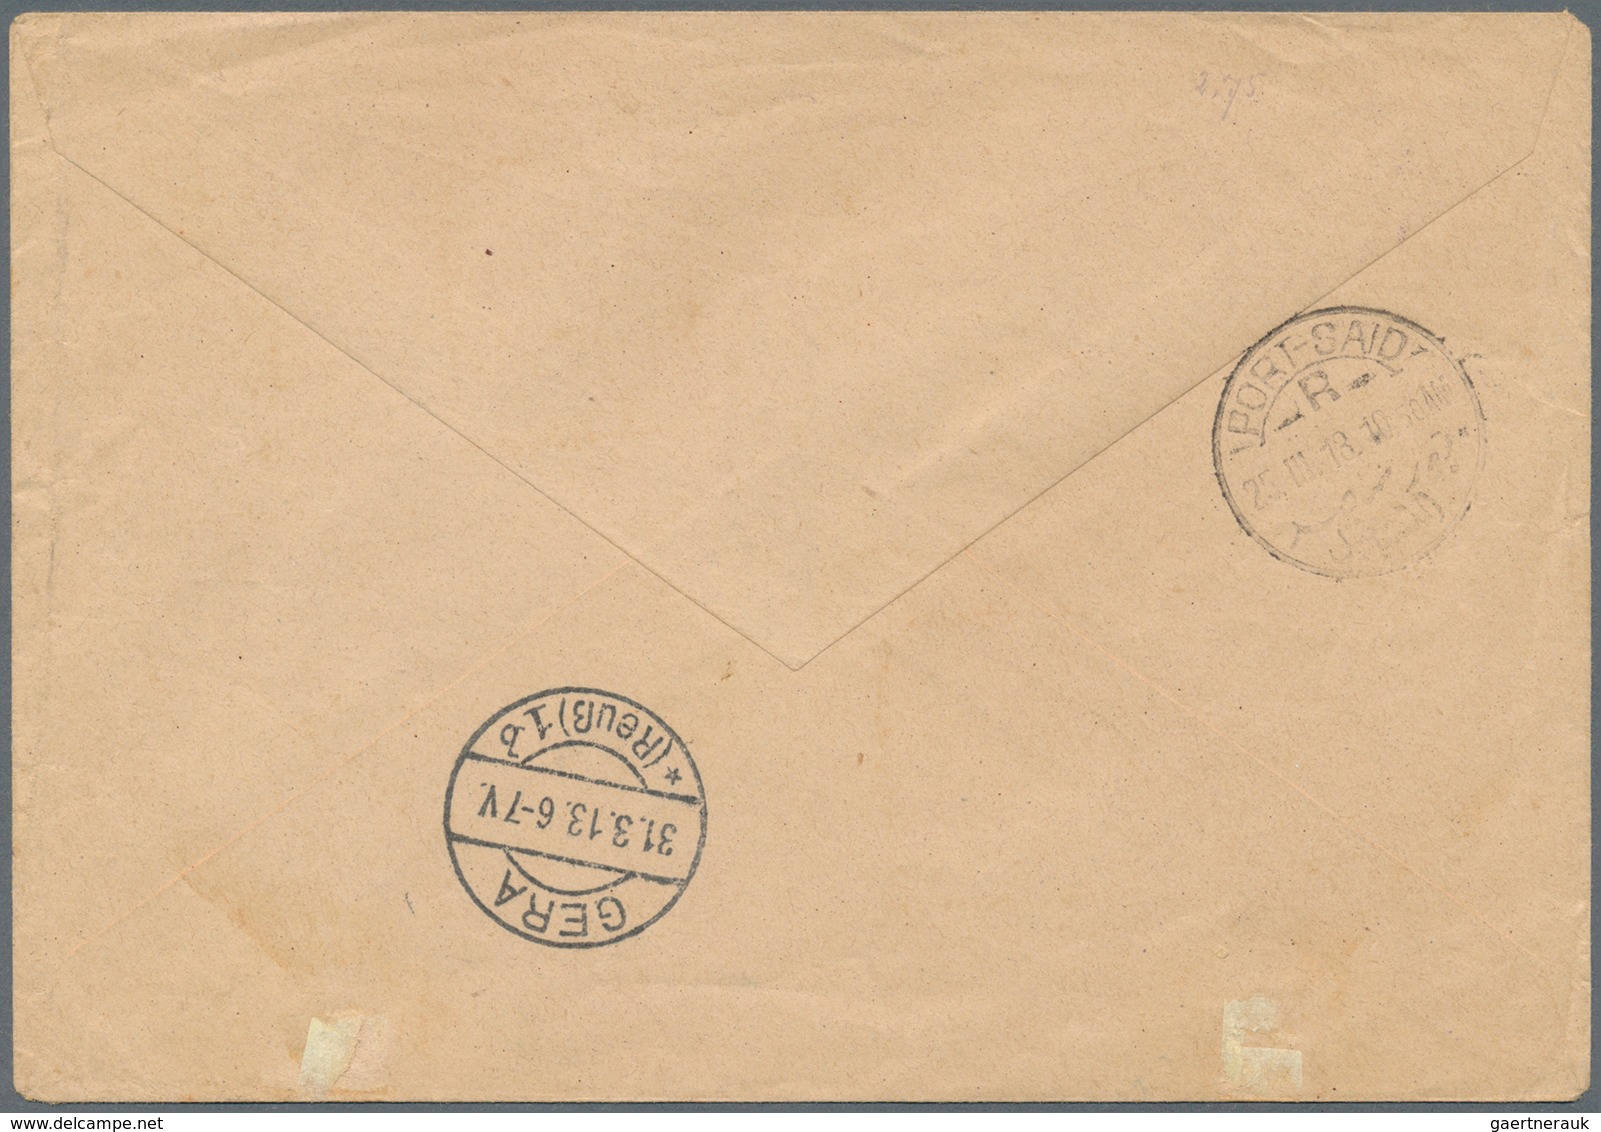 Holyland: 1913, 2 Pia./20 K. Tied Violet "ROPIT JAFFA -7 3 13" To Registered Cover To Germany, On Re - Palestina